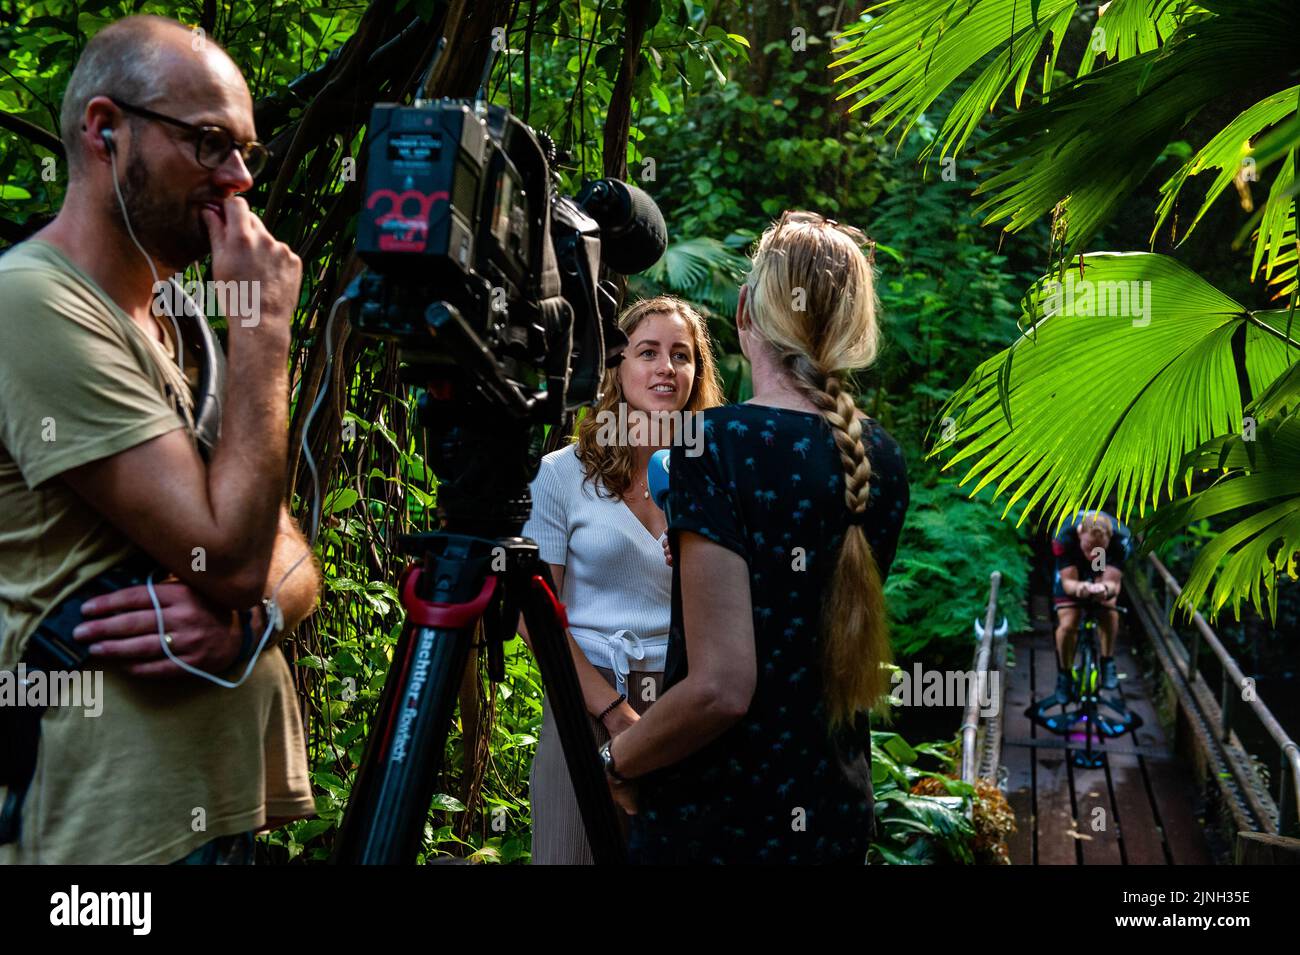 Athlete Olaf Van Den Bergh's girlfriend seen being interviewed. Dutch top athlete Olaf Van Den Bergh starts training in the indoor tropical rainforest of the Burgers' Zoo in Arnhem, in preparation for the Ironman World Championships in Kailua-Kona located in Hawaii. The Bush (indoor tropical rainforest) is the ideal training location because of the high humidity and temperature. Stock Photo